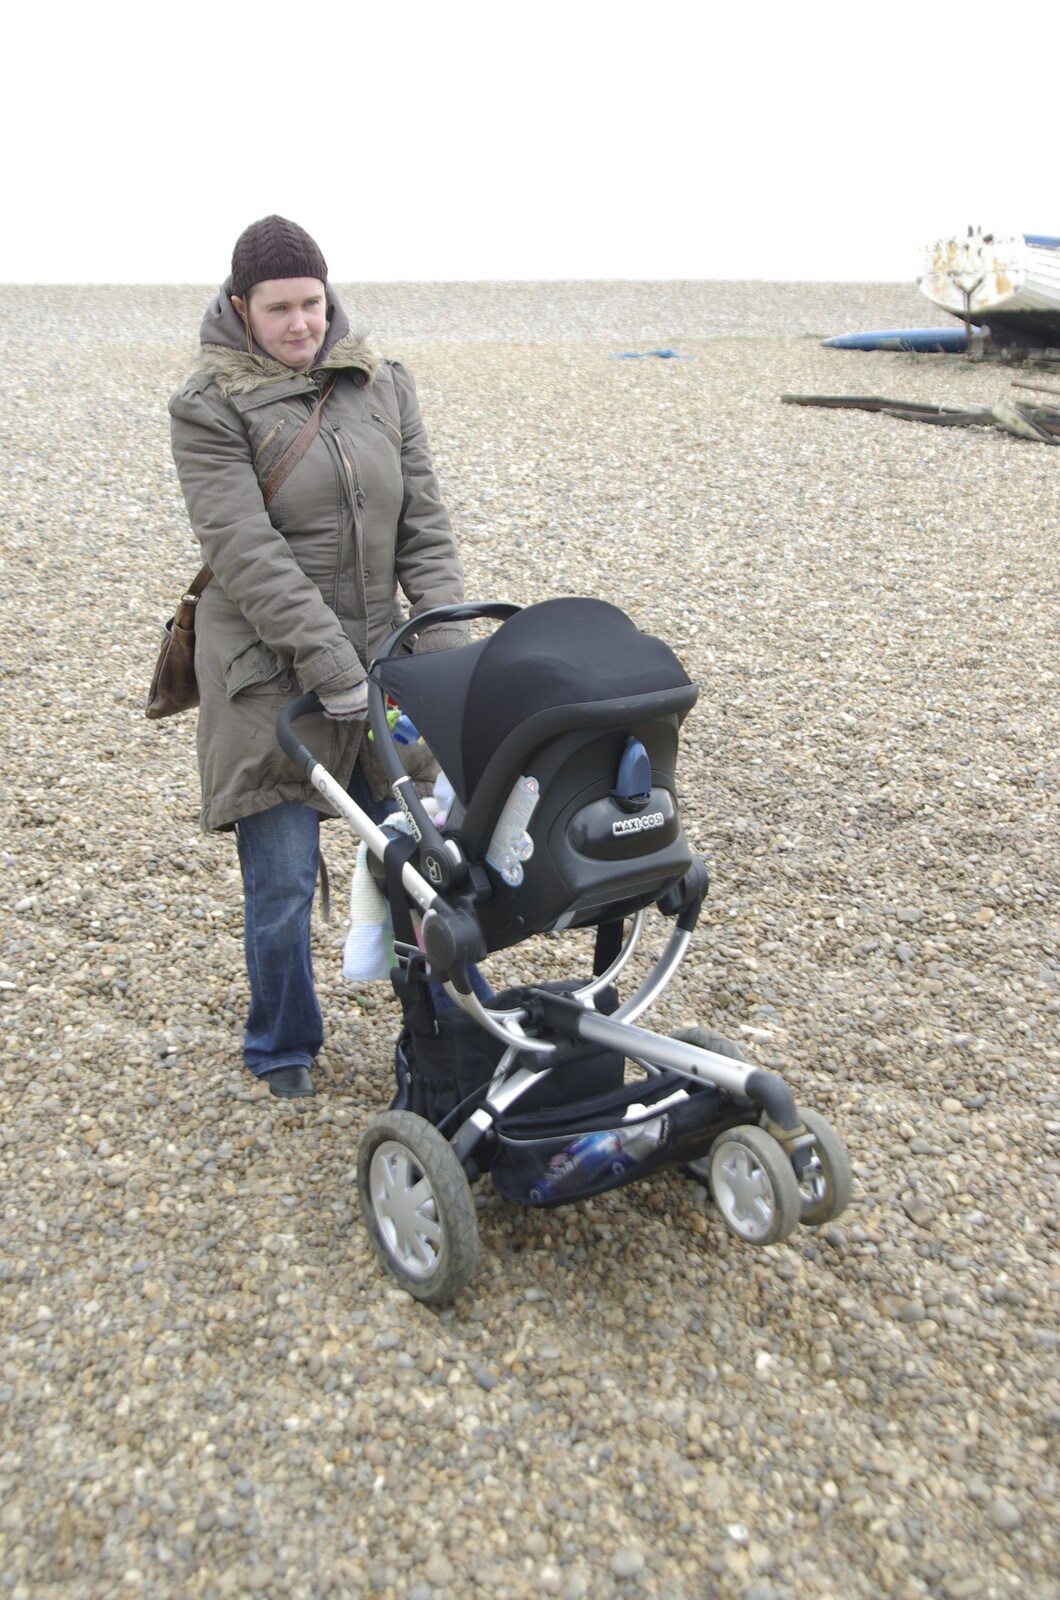 Isobel hauls the buggy about on the beach from Aldeburgh Lifeboats with The Old Chap, and a Night at Amandines, Diss, Norfolk - 1st March 2009